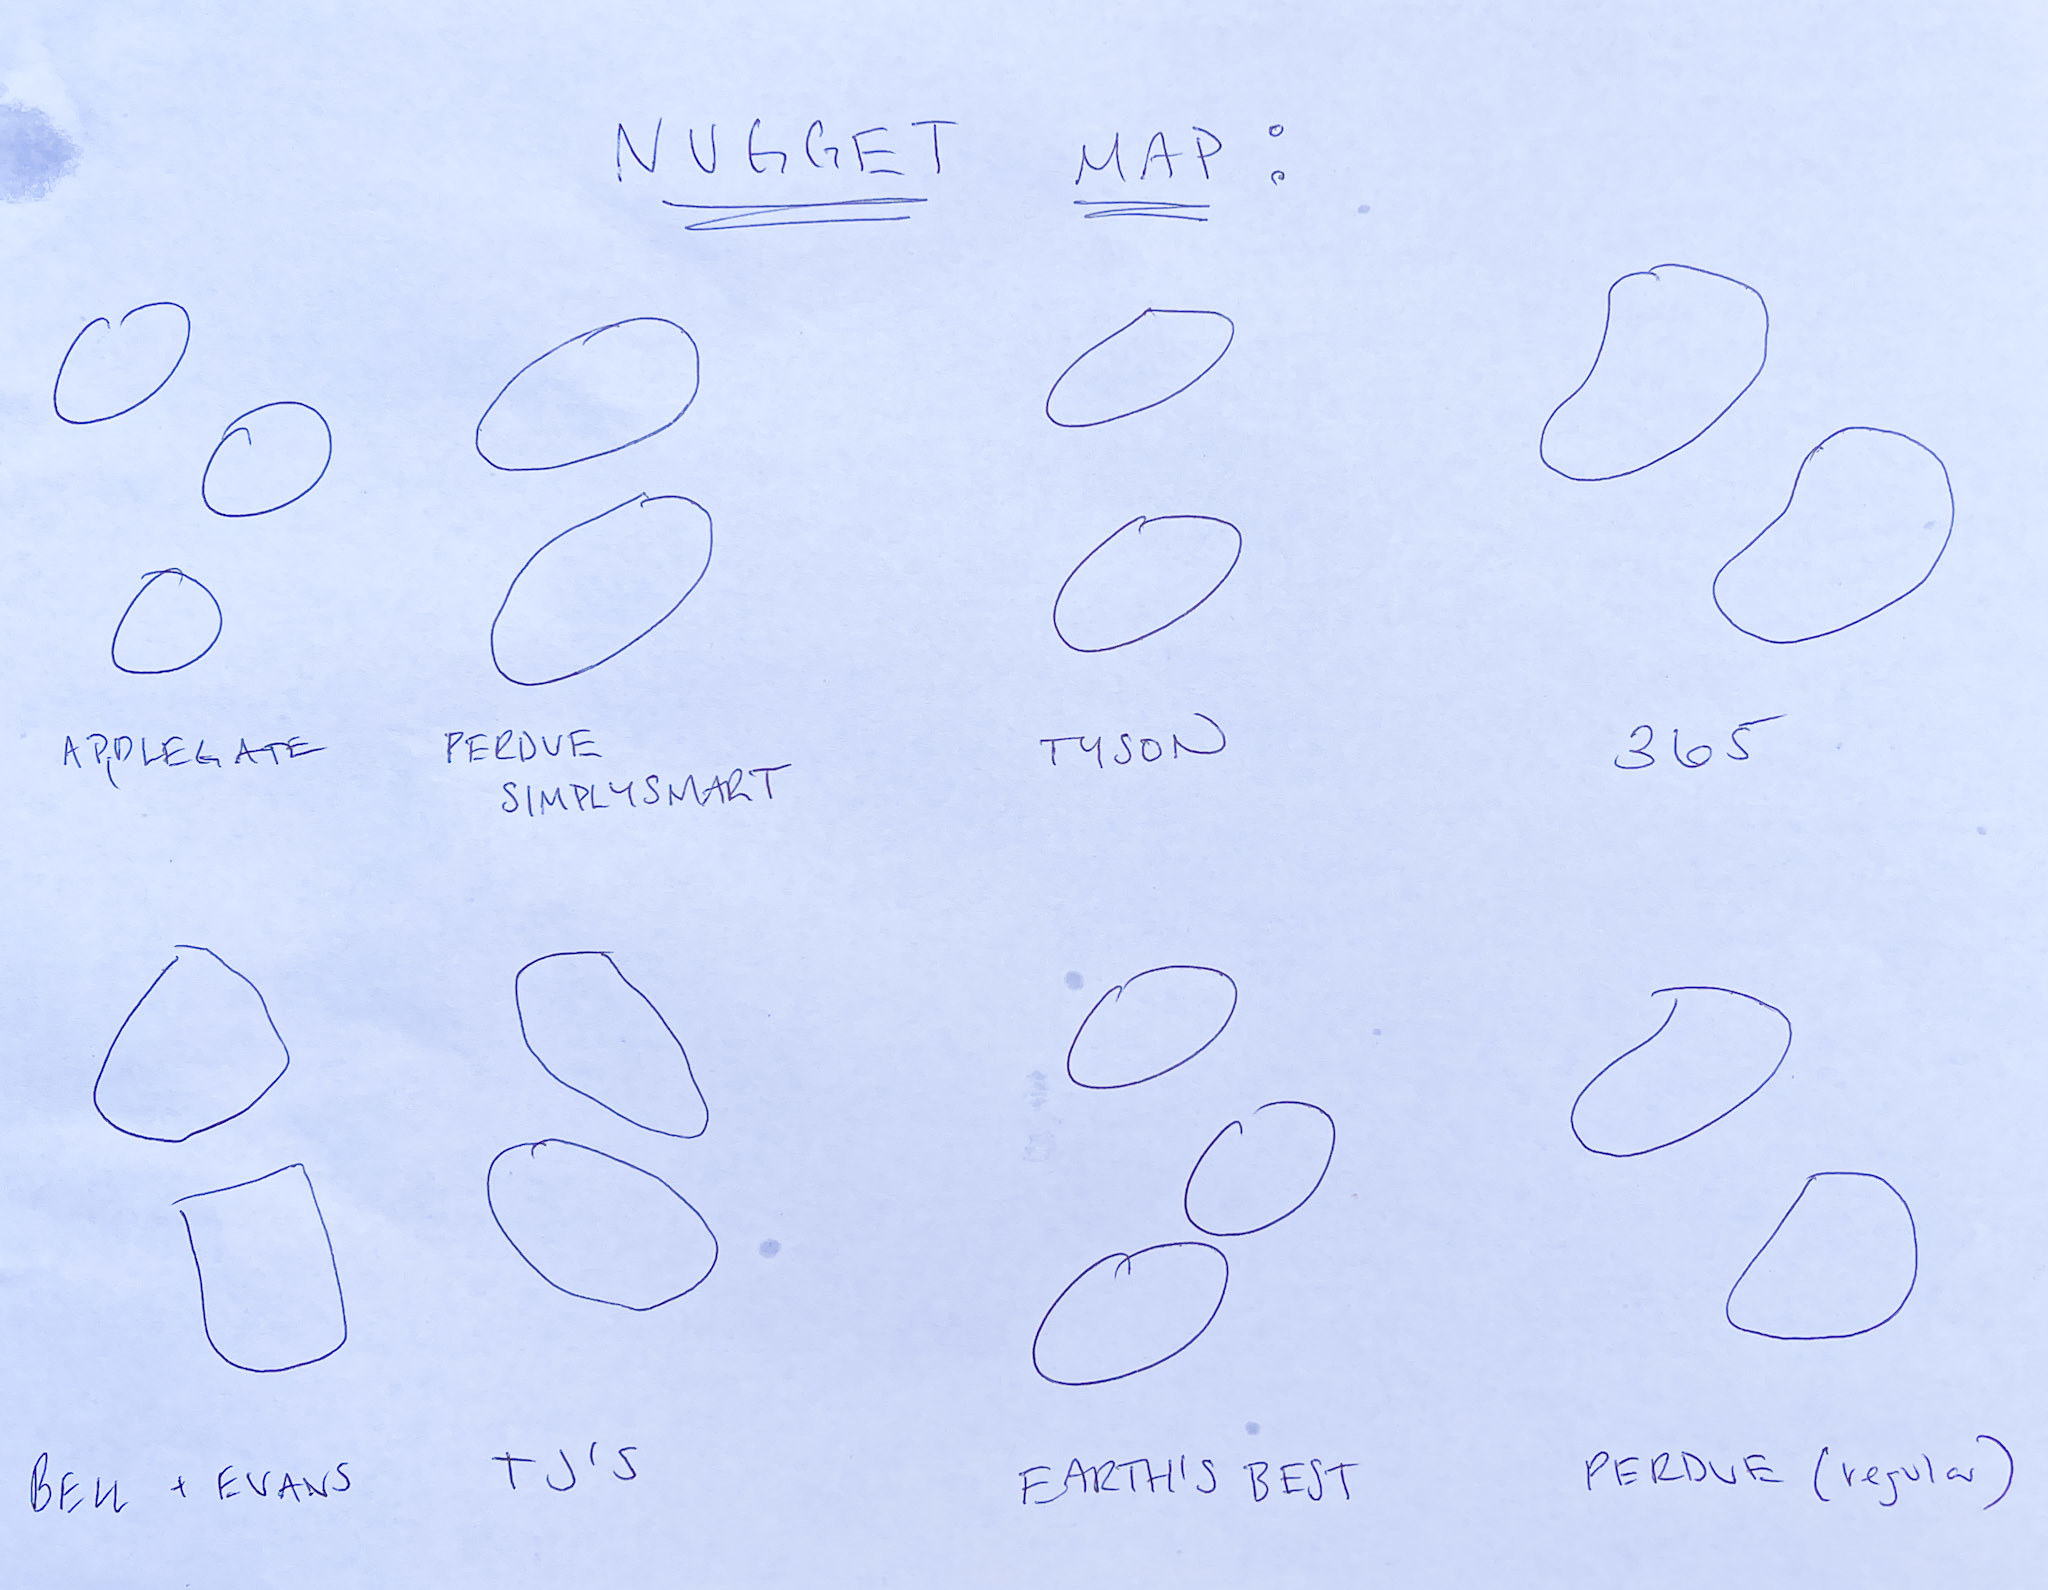 Ross&#x27;s hand-drawn picture of the nugget map